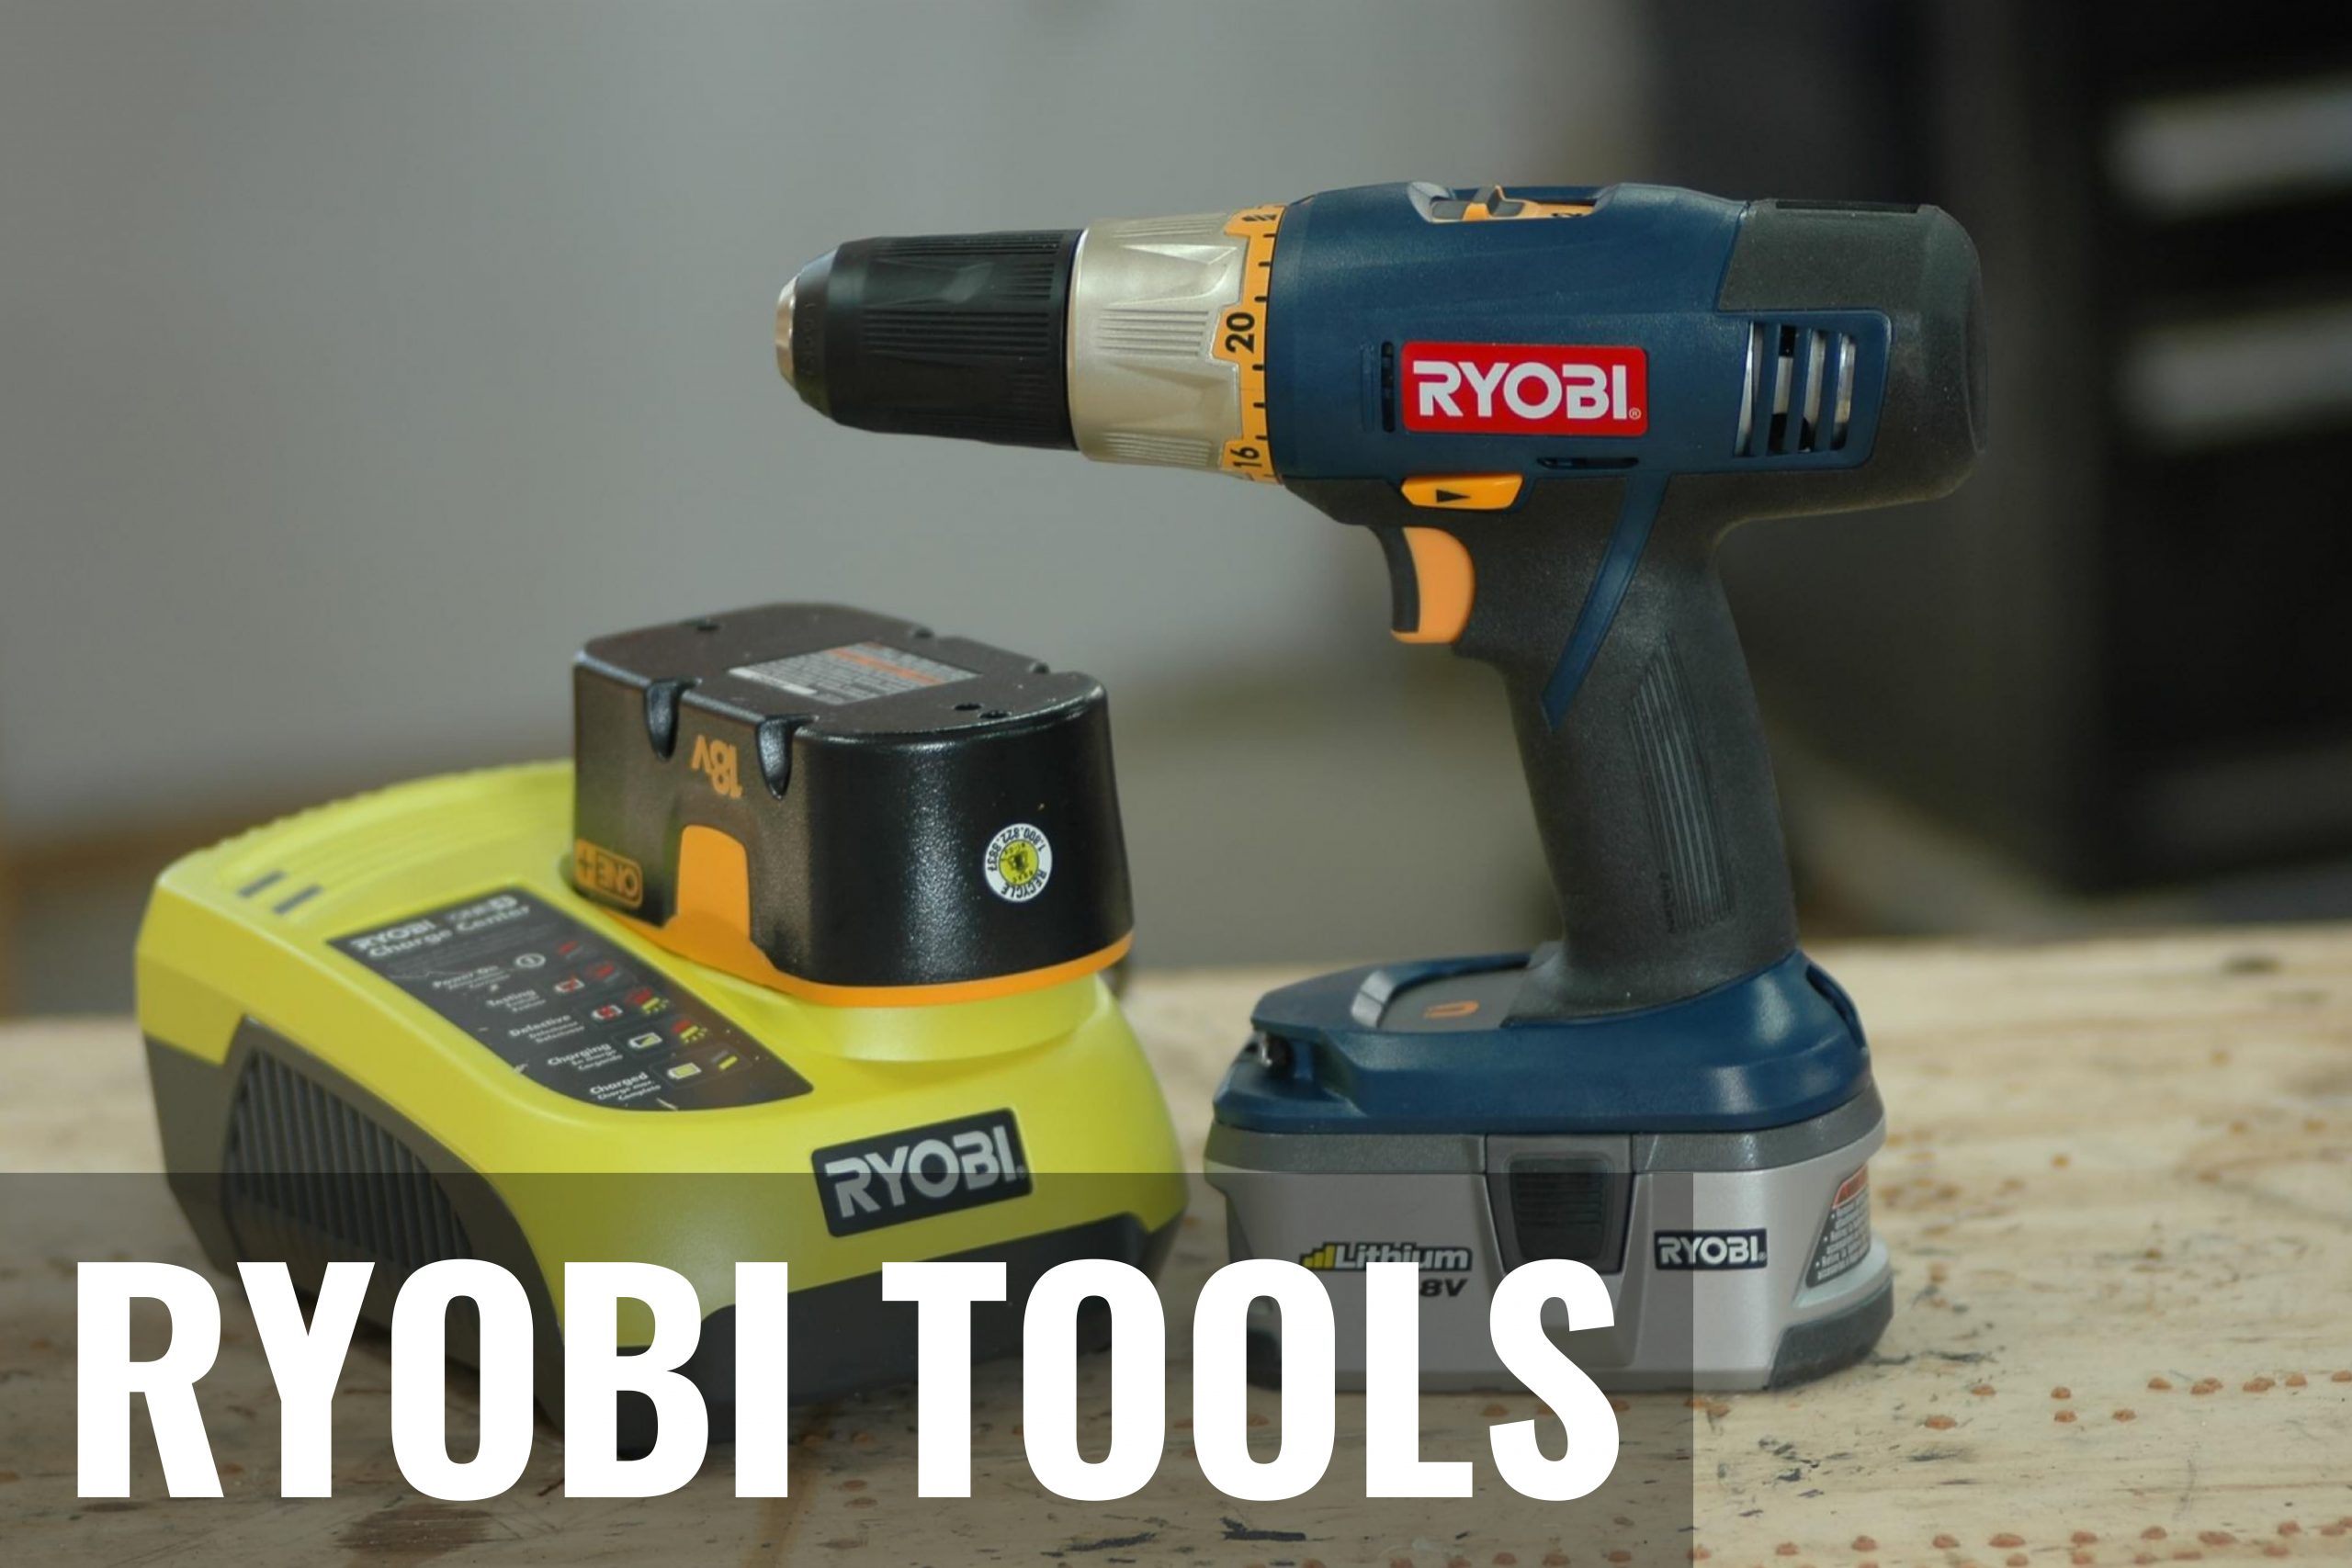 do old ryobi tools work with new batteries? 2